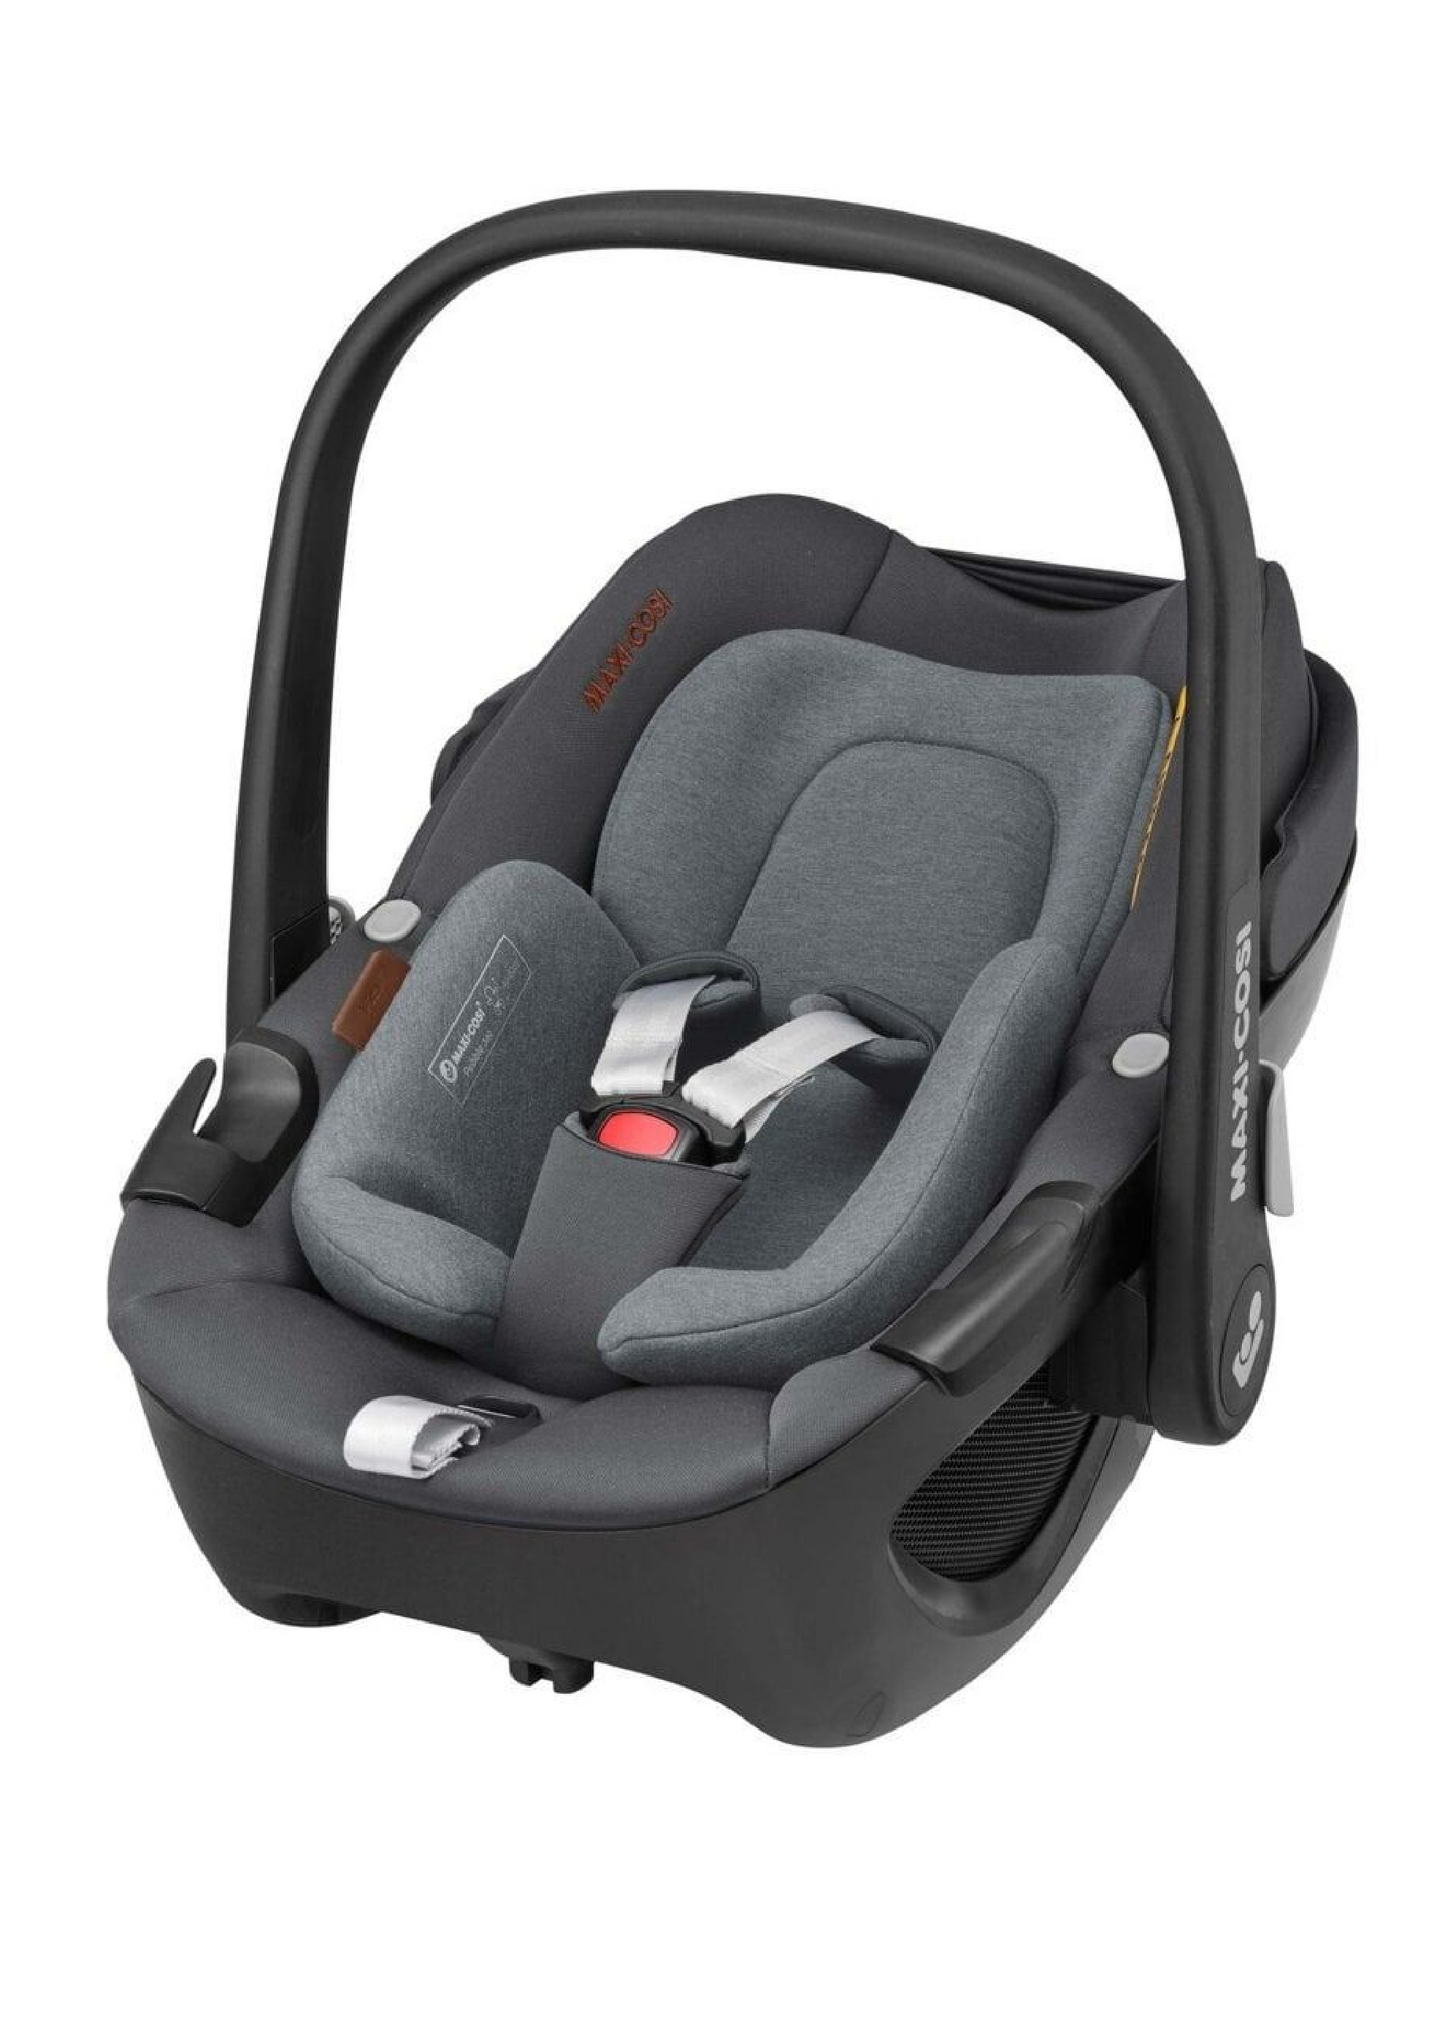 Maxi Cosi Adorra Luxe and Pebble 360 Travel System